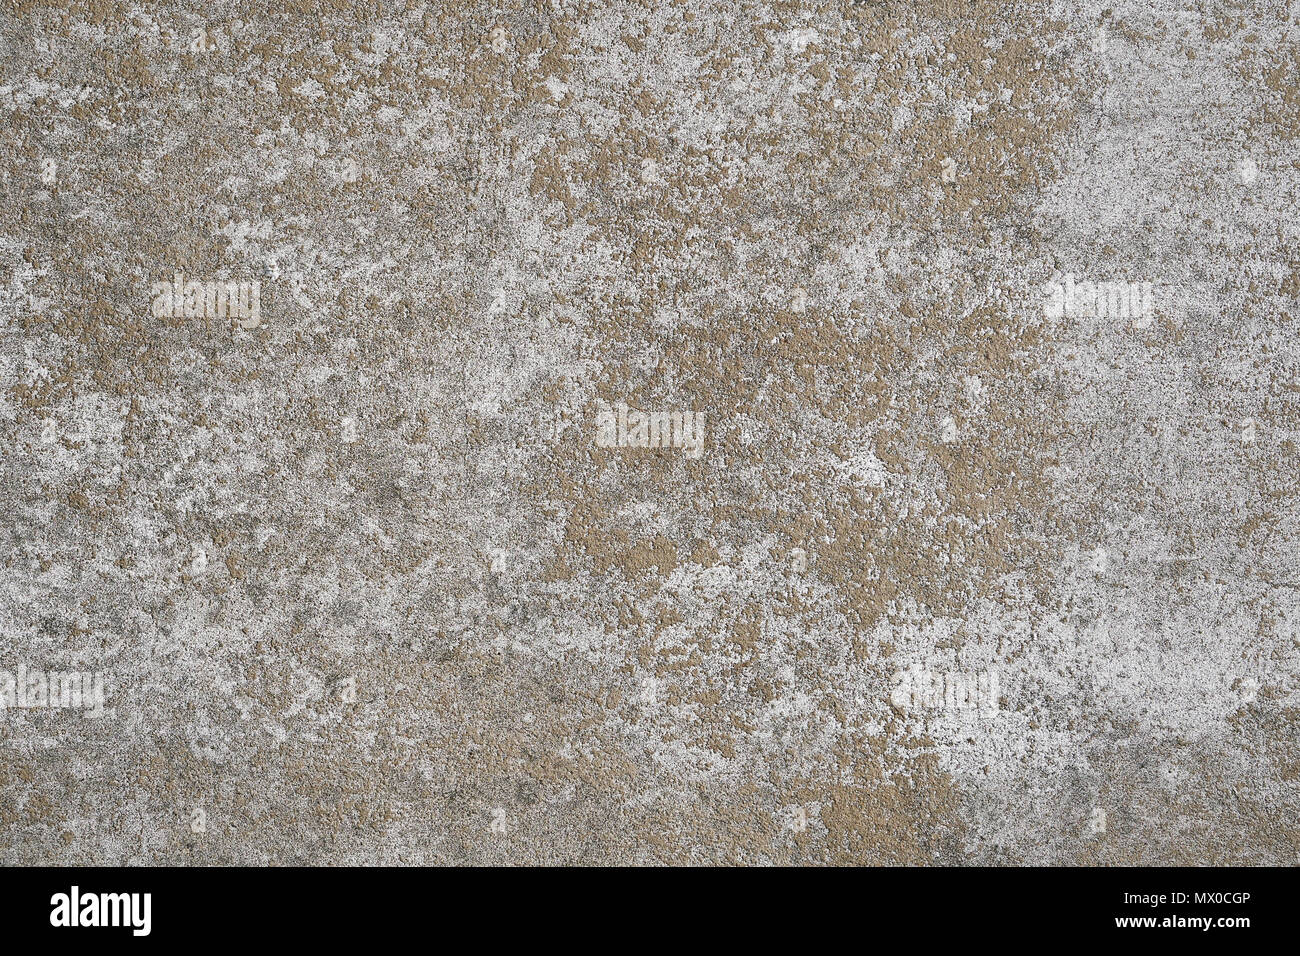 weathered concrete stone wall background texture pattern with white paint mostly peeled off Stock Photo